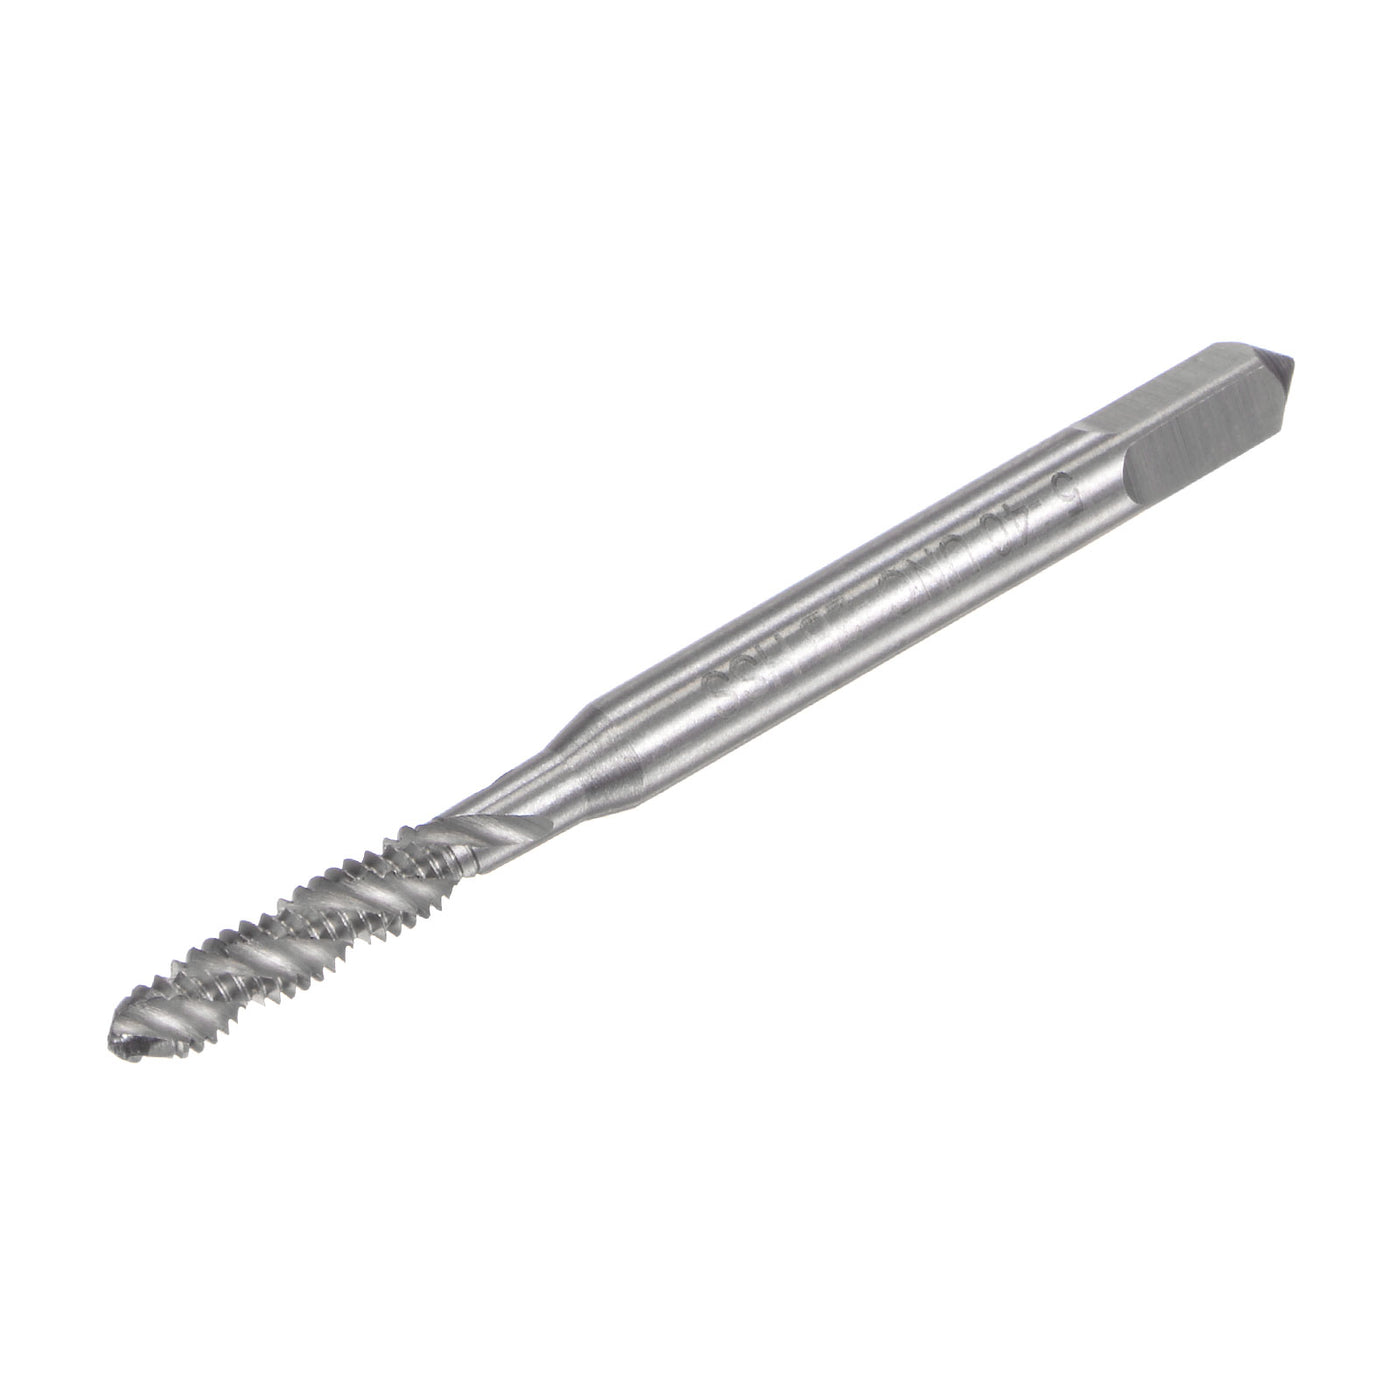 uxcell Uxcell 5-40 UNC 2B High Speed Steel(HSS) Uncoated Machine Spiral Flutes Thread Tap